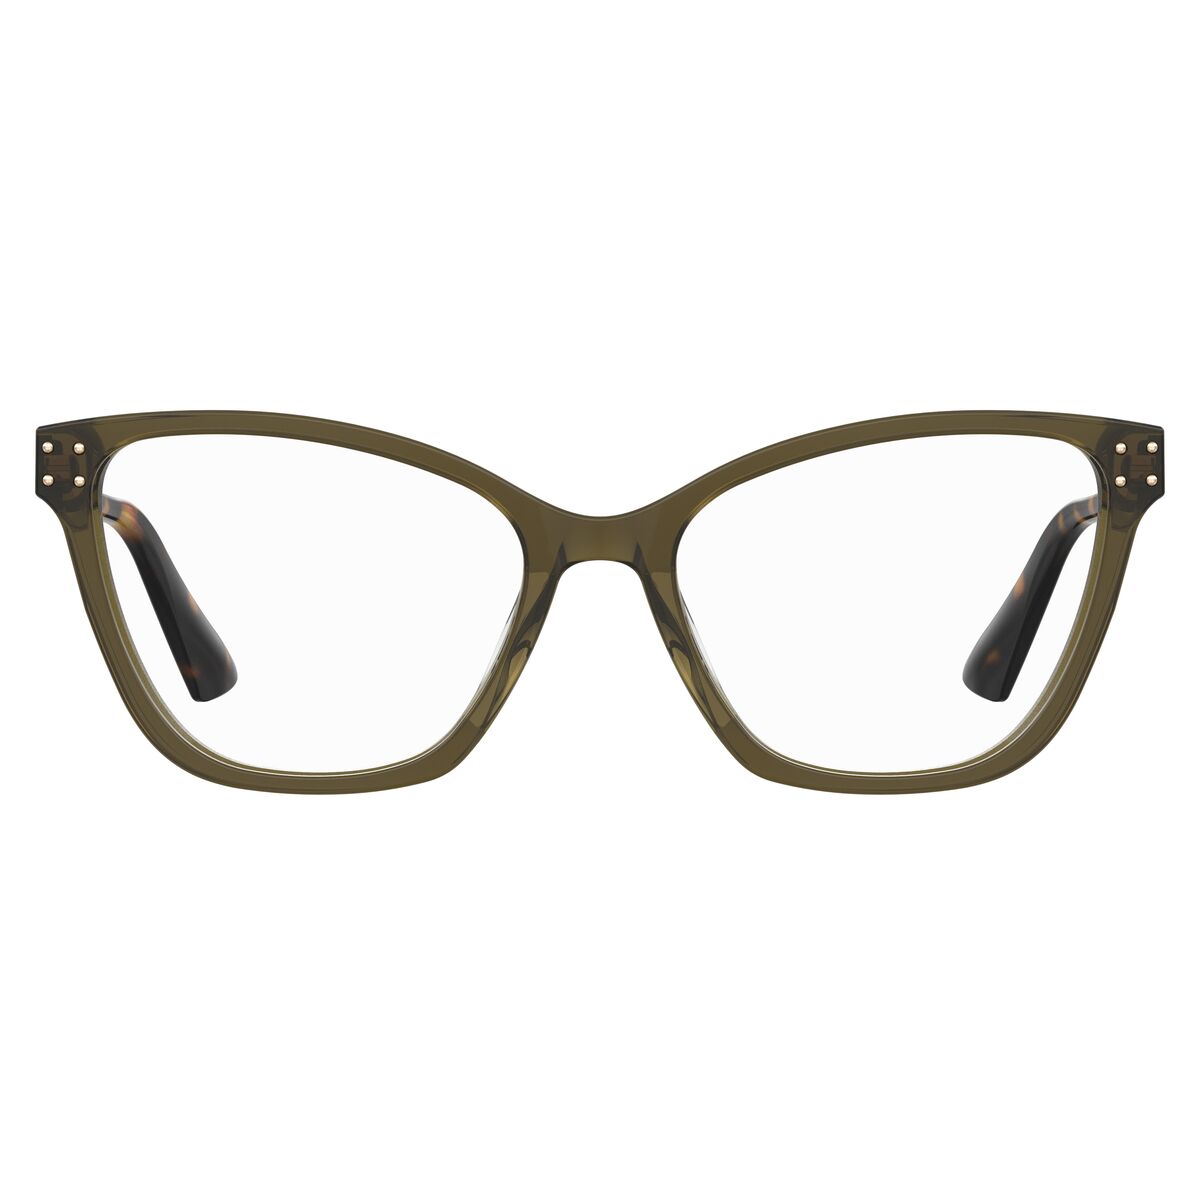 Ladies' Spectacle frame Moschino MOS595-3Y5 ø 54 mm